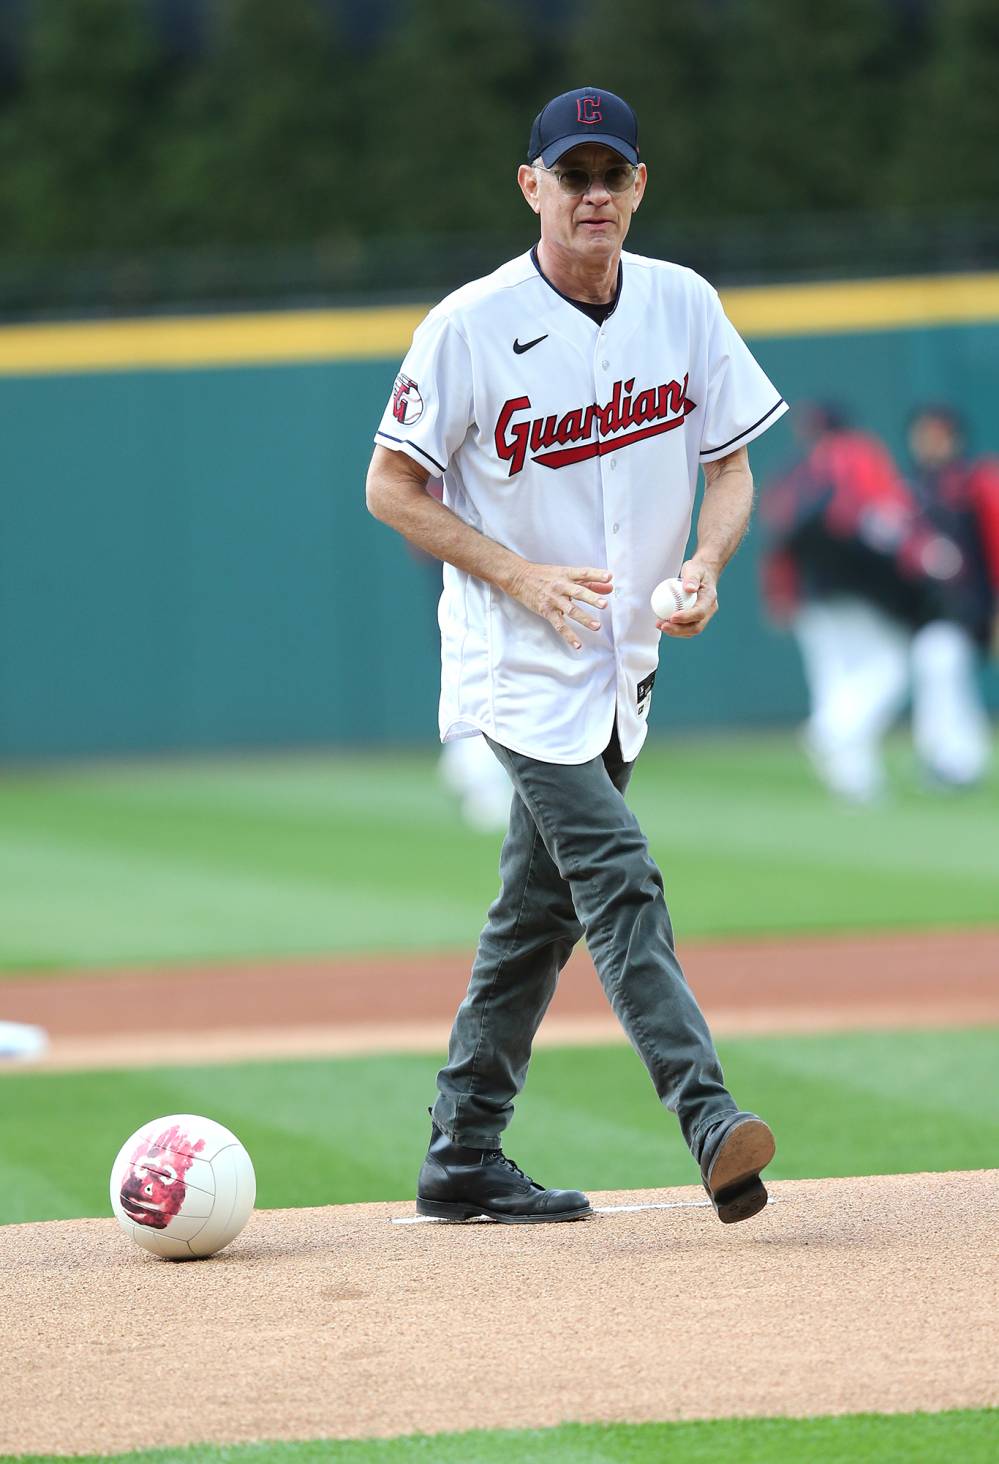 Tom Hanks Brings 'Cast Away' Volleyball Wilson to Help Throw Out 1st Pitch at Cleveland Guardians Game